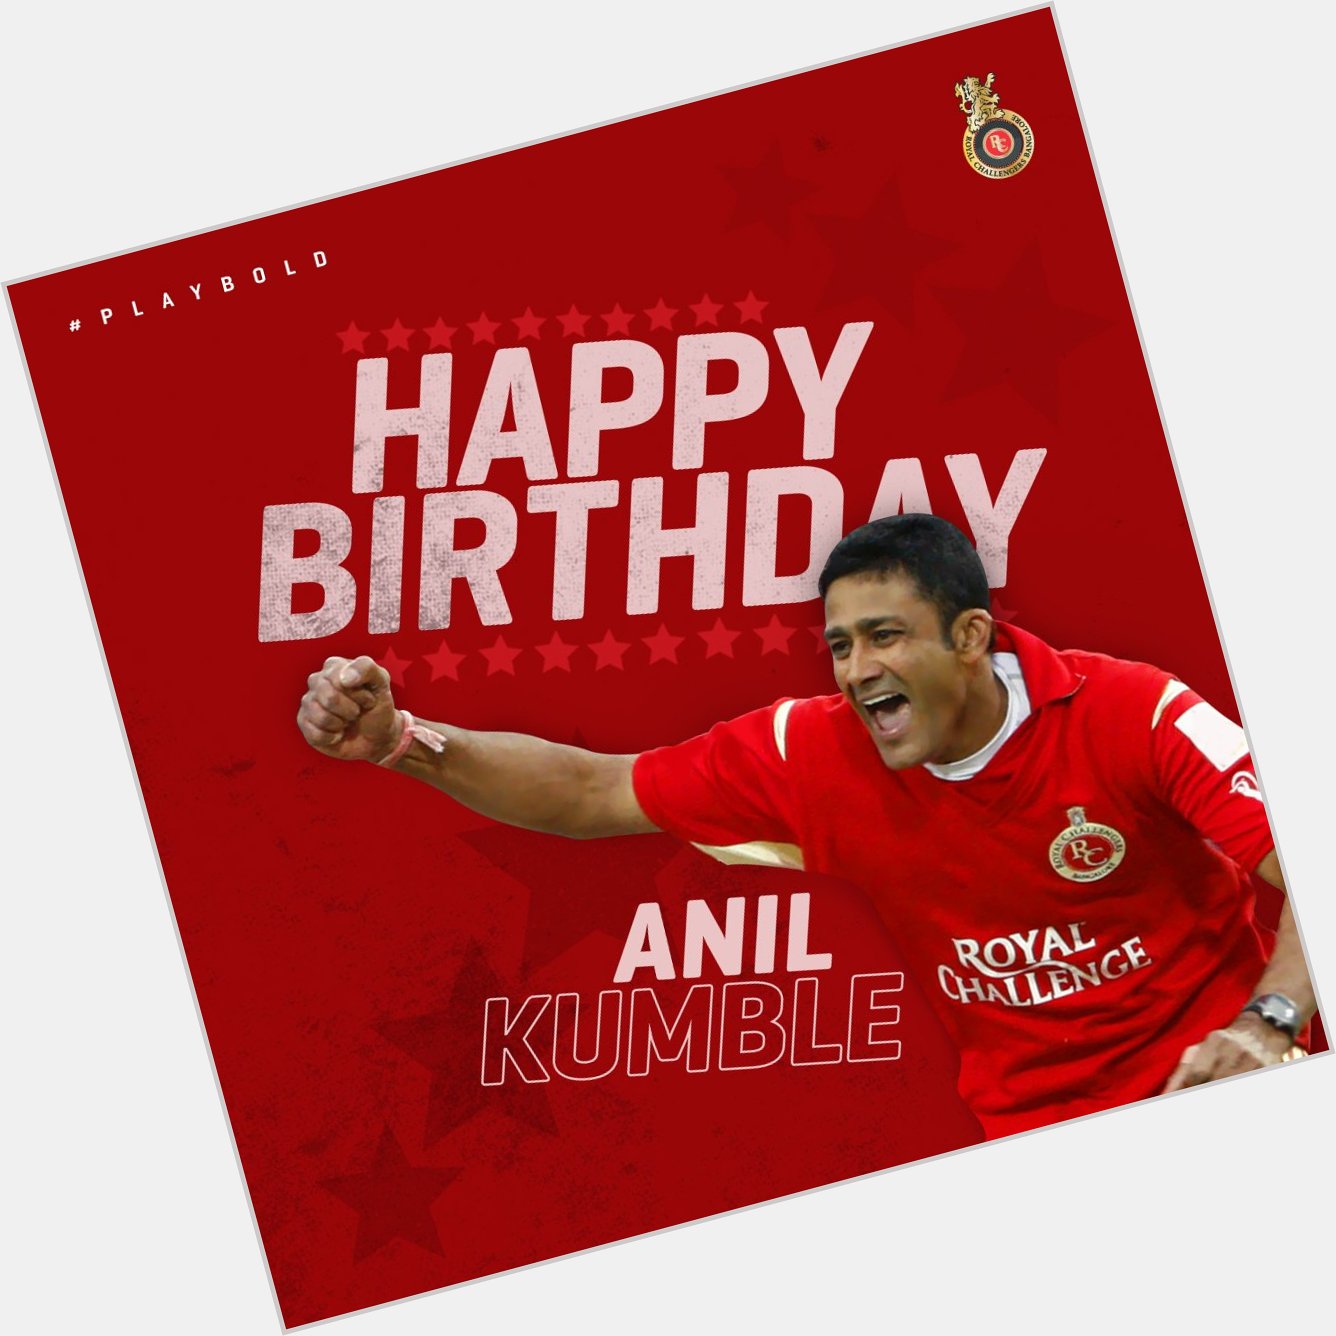 6  1  9  Test wickets, but very special ones.

Happy Birthday Anil Kumble!   